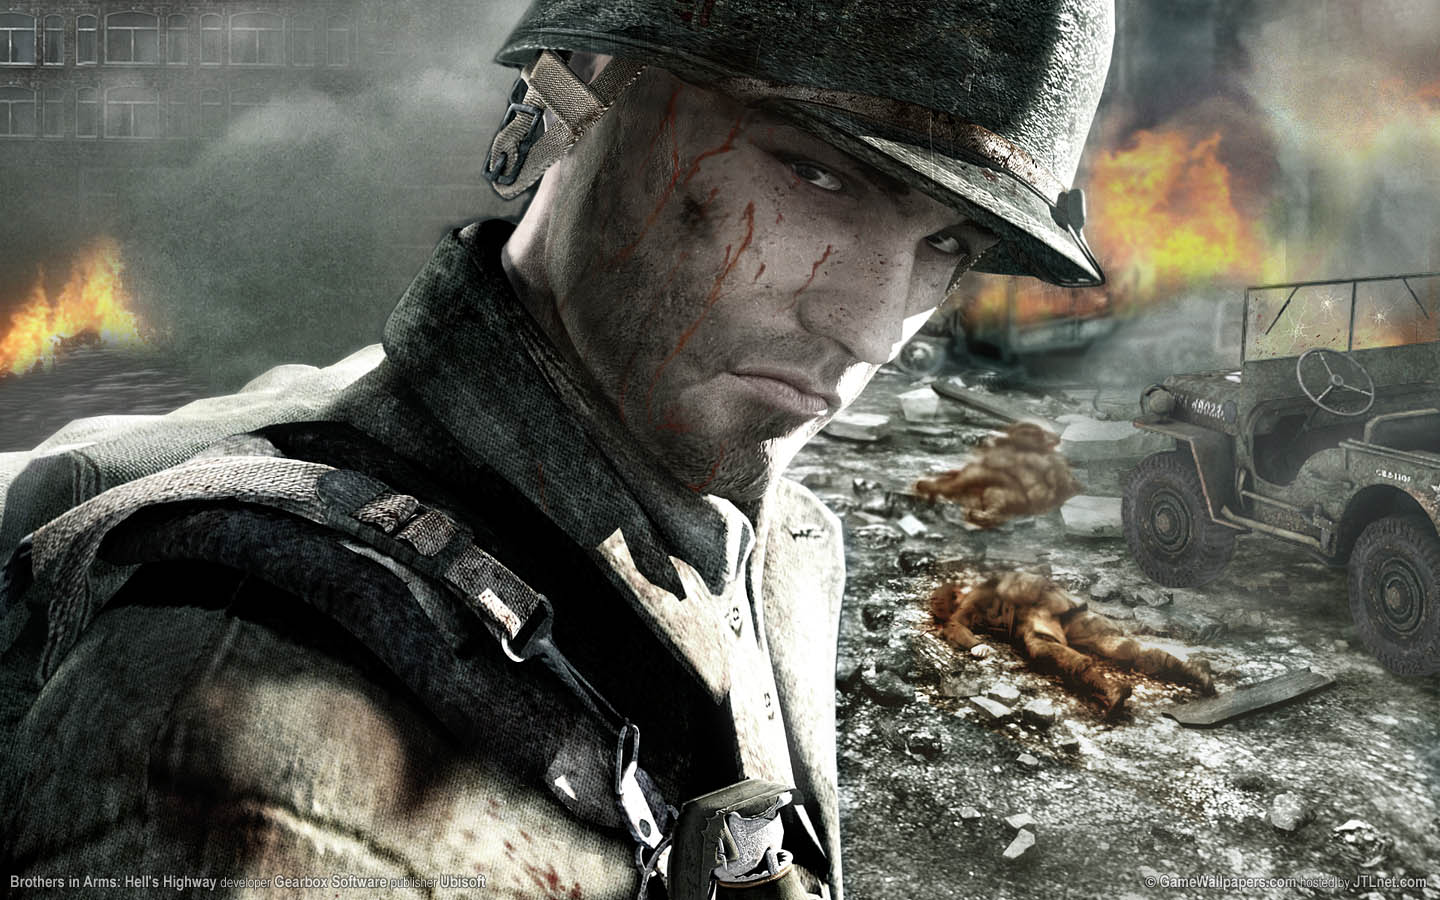 Brothers in Arms: Hell's Highway fond d'cran 01 1440x900